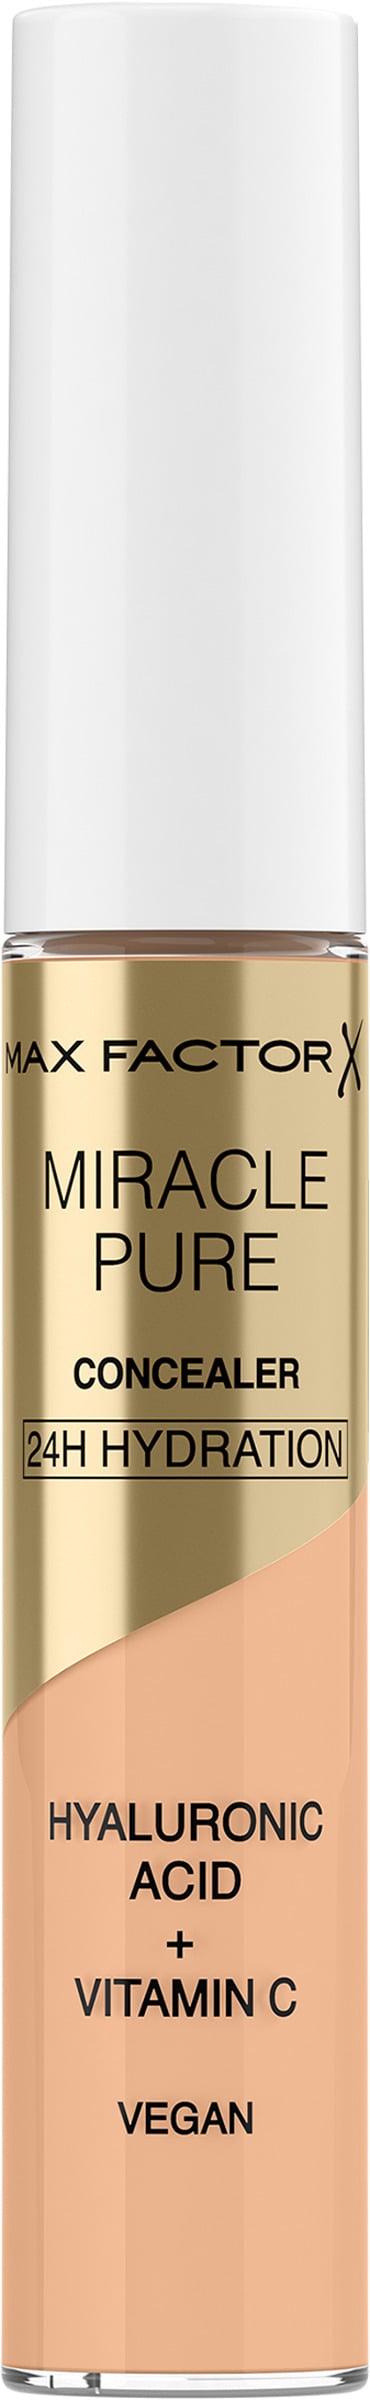 Max Factor Miracle Pure Concealer 01 Fair 8 ml